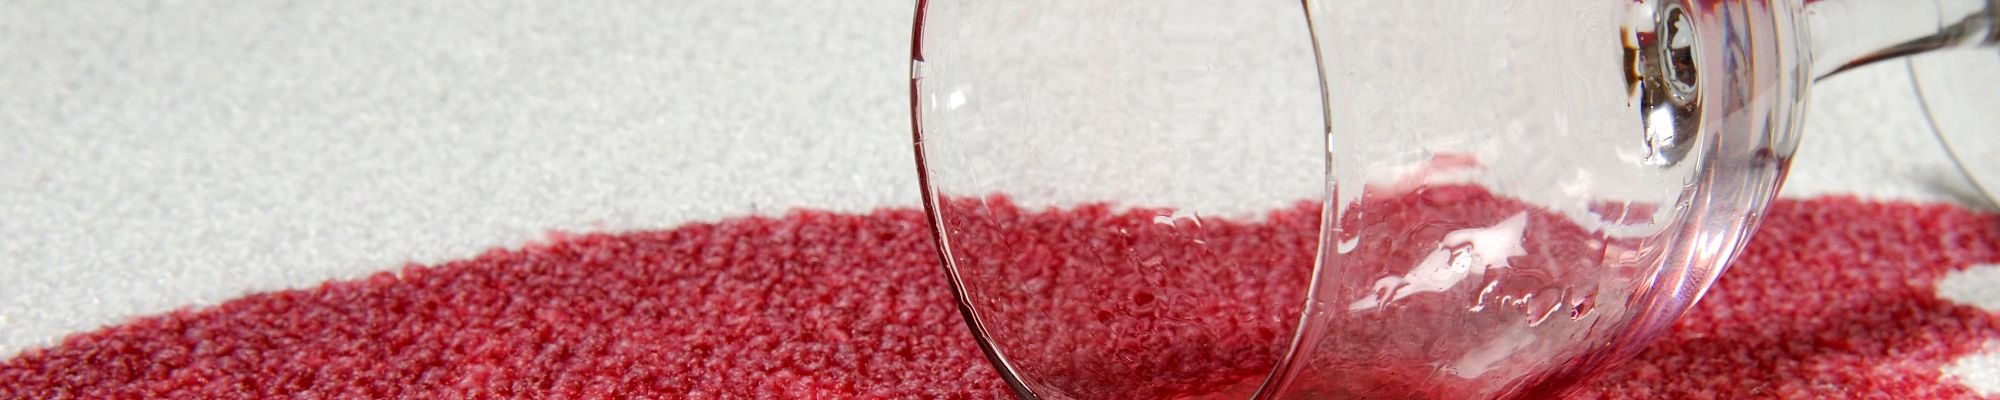 Spilled wine on carpet from Floortech Corporation in Greenwood and Franklin, IN